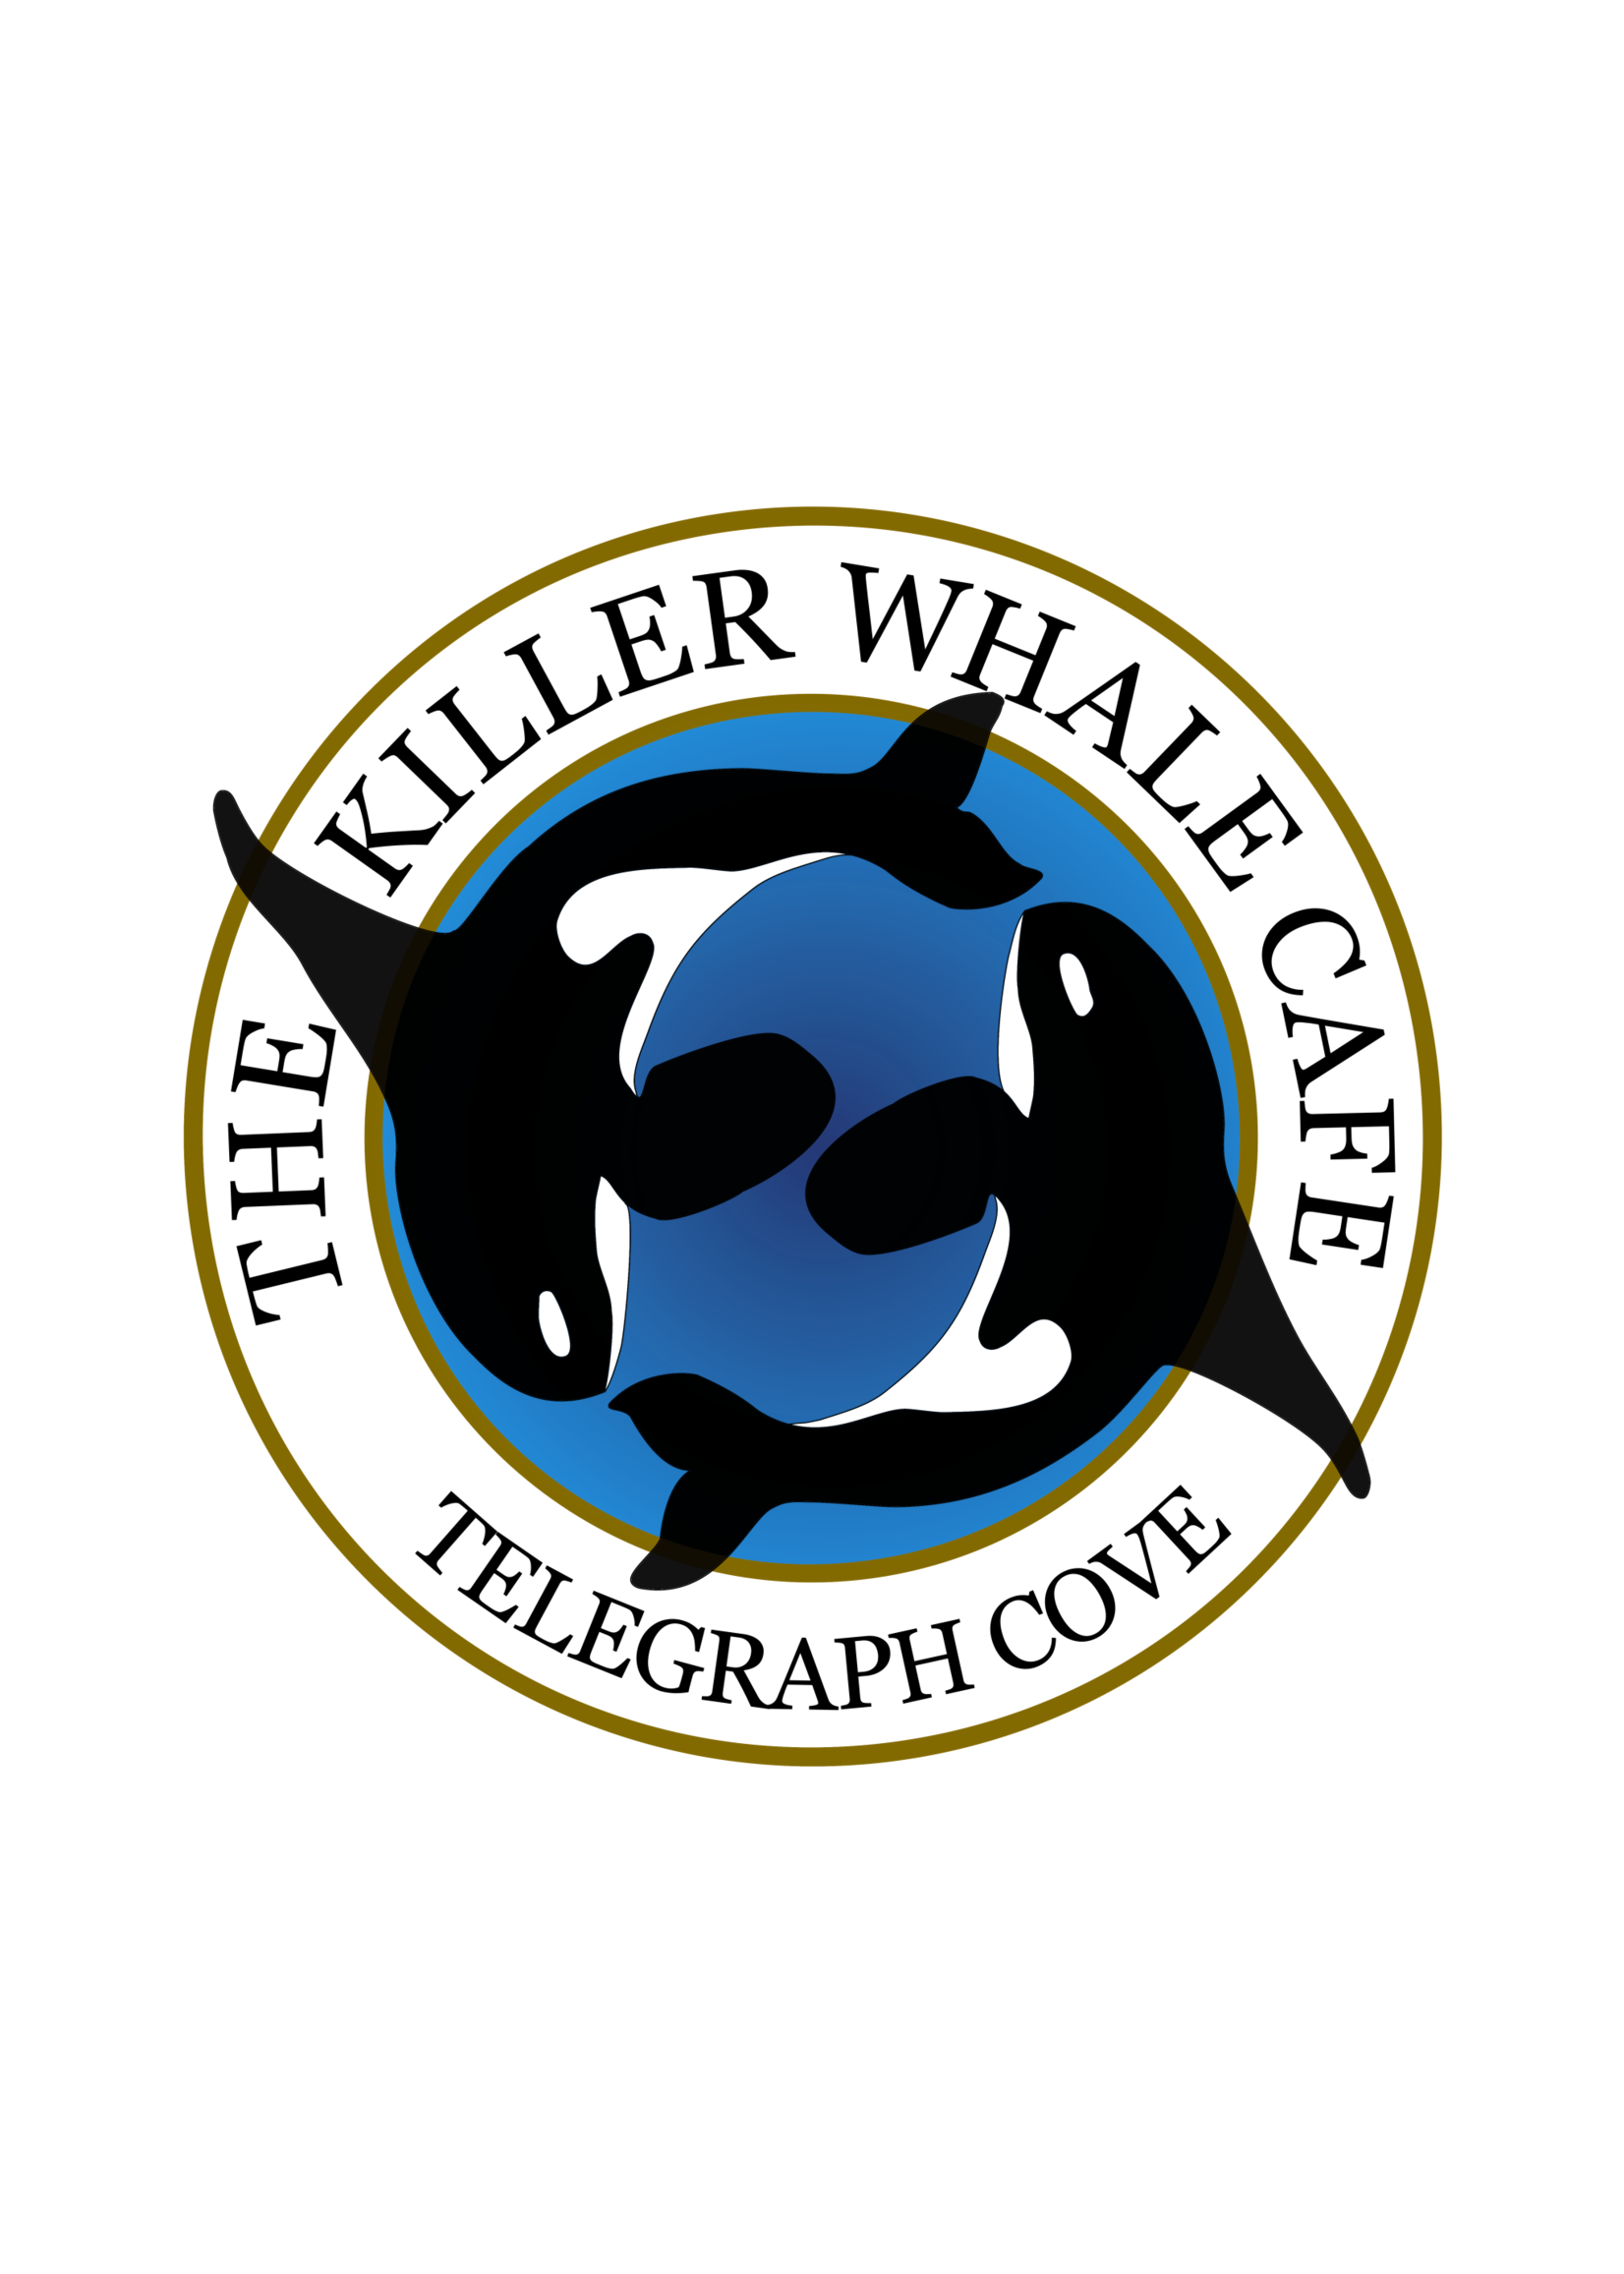 Sticker The Killer Whale Cafe